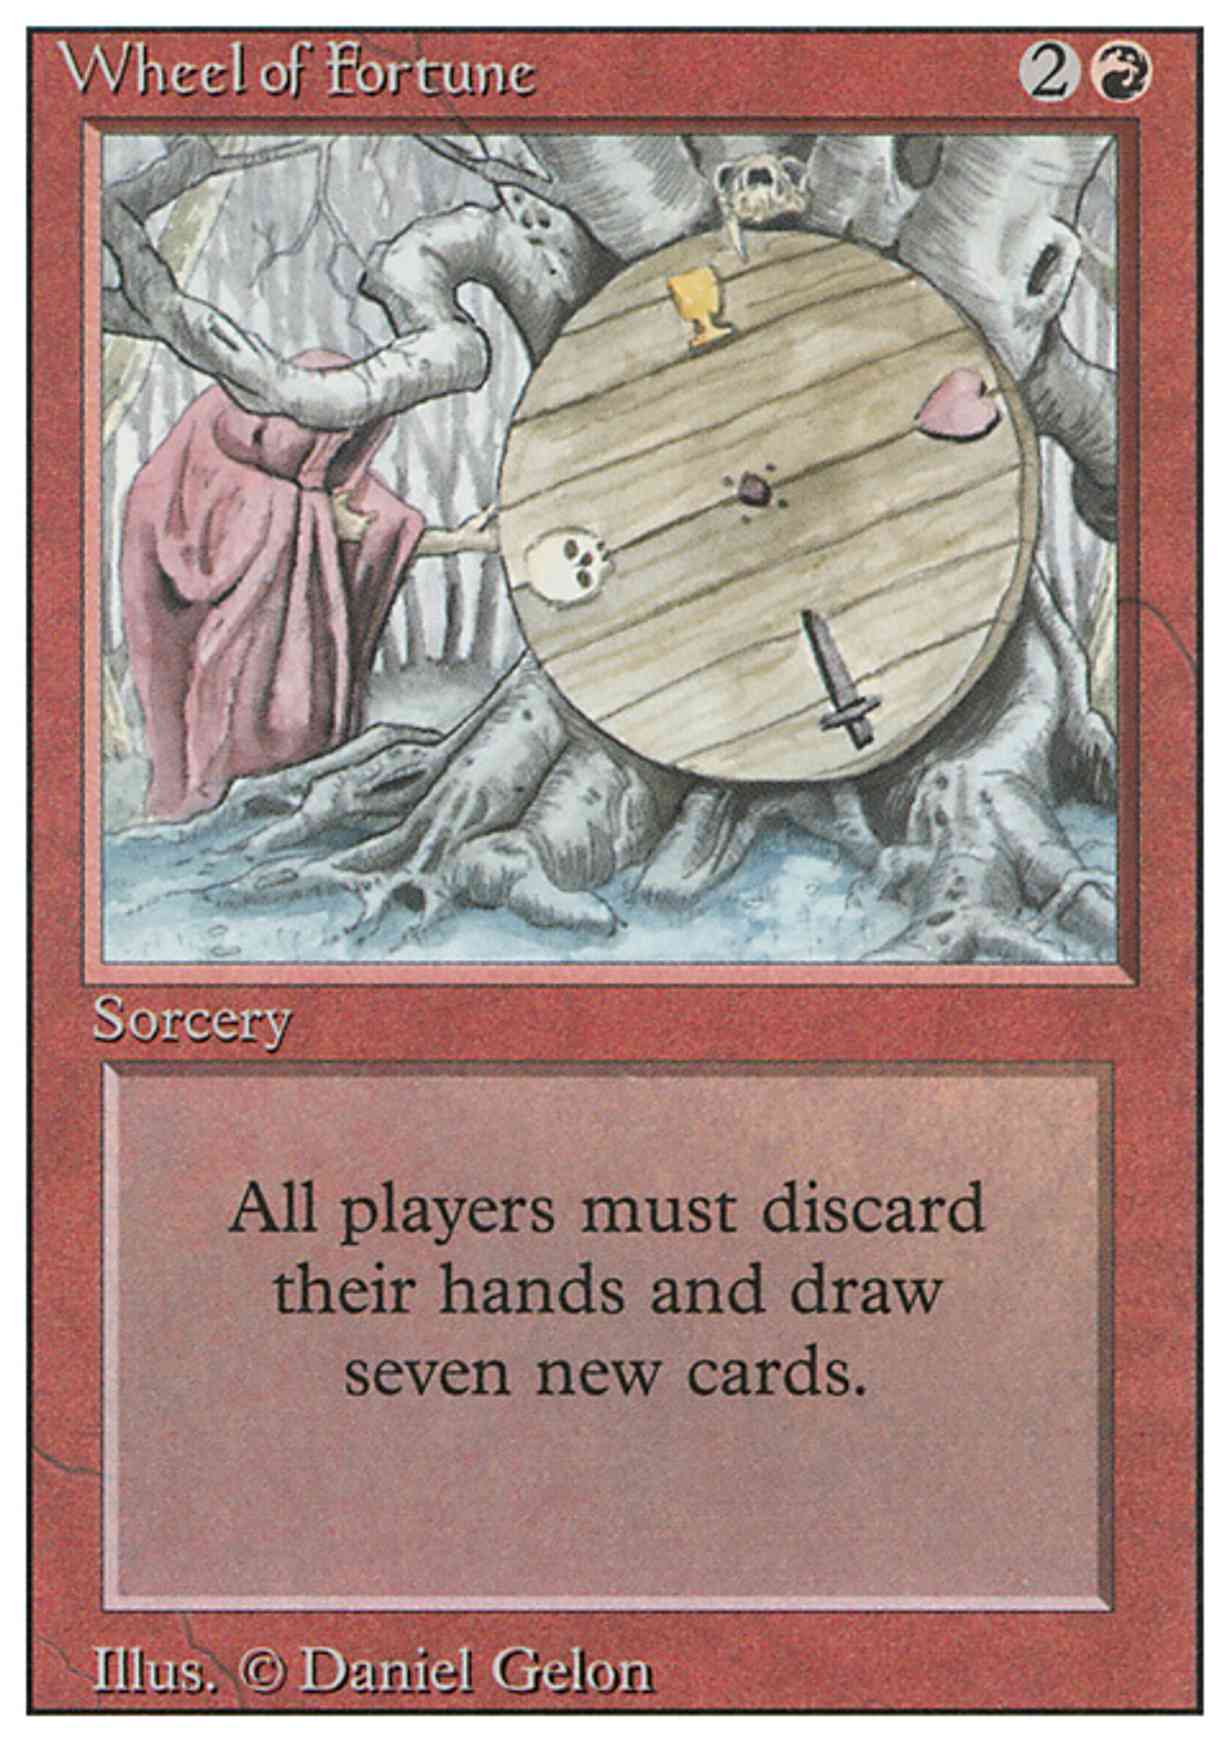 Wheel of Fortune magic card front